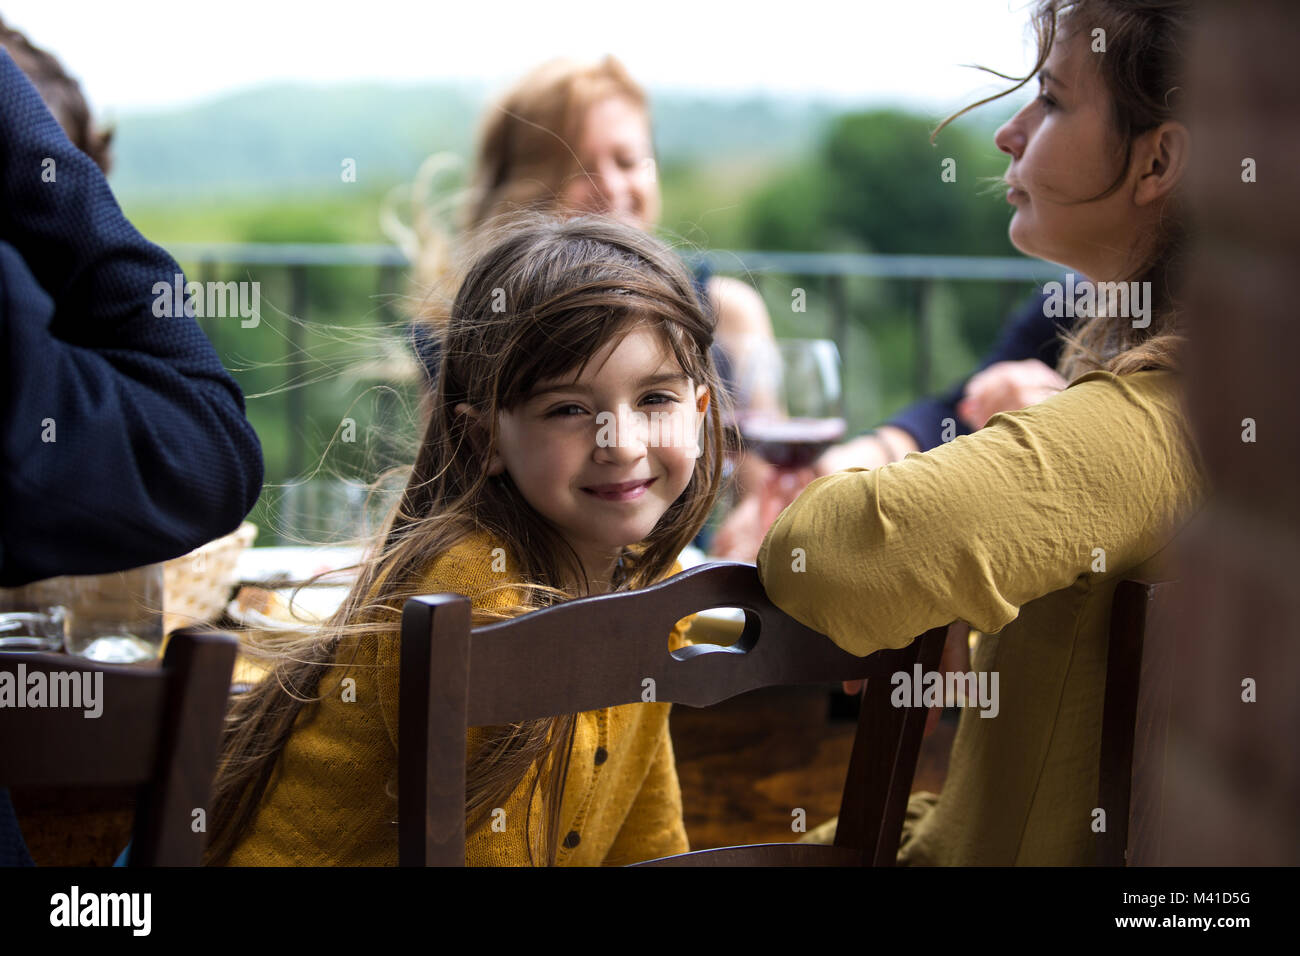 Portrait of girl at a family meal outdoors Stock Photo